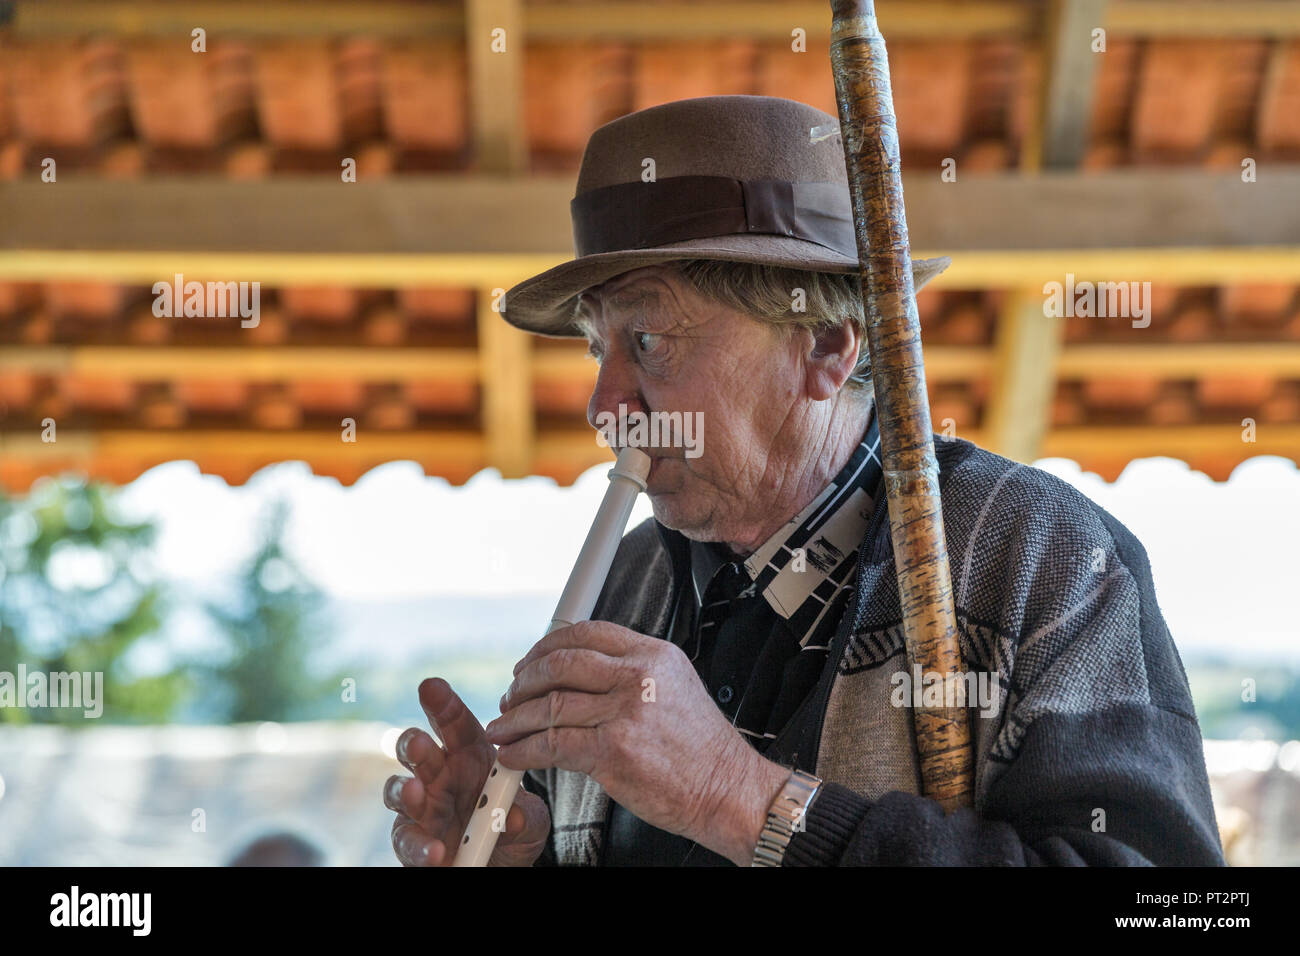 YABLUNYTSIA, UKRAINE - SEPTEMBER 12, 2018: Senior man folk musician plays music on the saw on mountain valley Peppers, place for rest and entertainmen Stock Photo